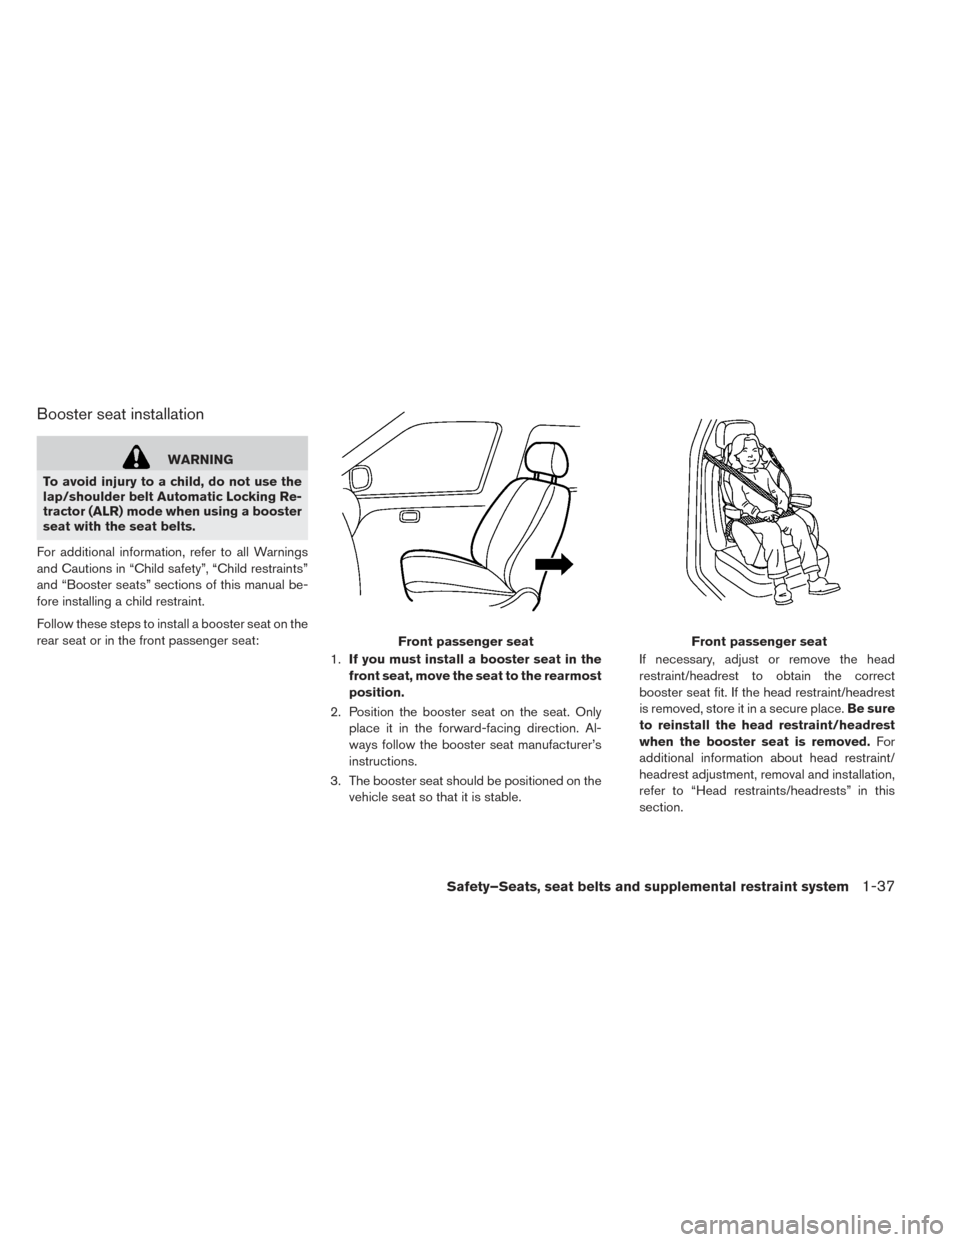 NISSAN LEAF 2016 1.G Owners Manual Booster seat installation
WARNING
To avoid injury to a child, do not use the
lap/shoulder belt Automatic Locking Re-
tractor (ALR) mode when using a booster
seat with the seat belts.
For additional in